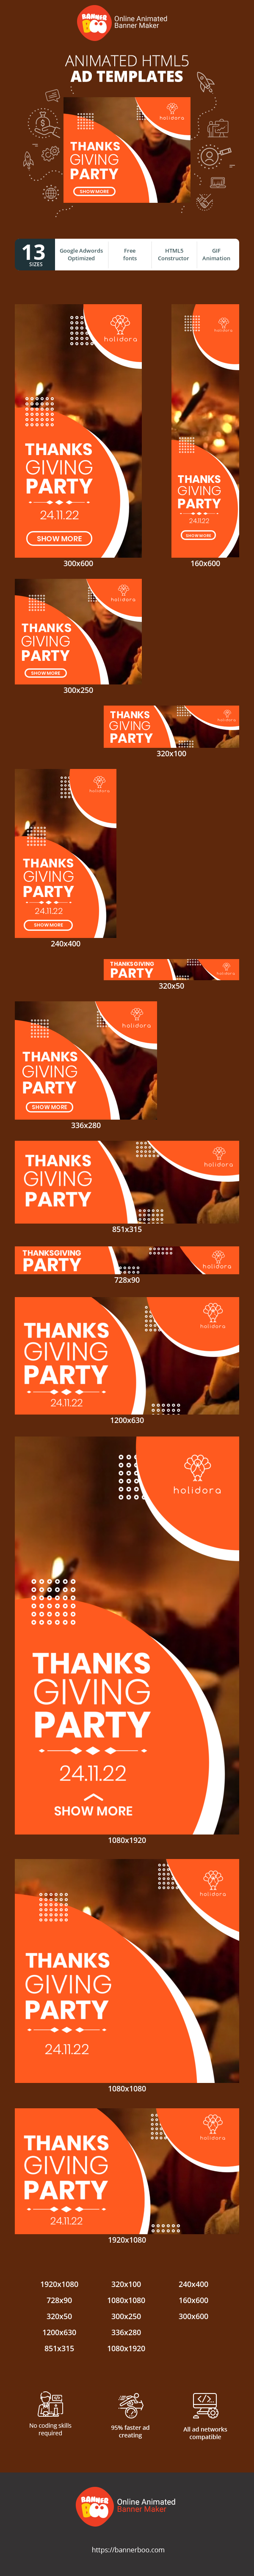 Banner ad template — Thanksgiving Party 24.11.22 — Holiday